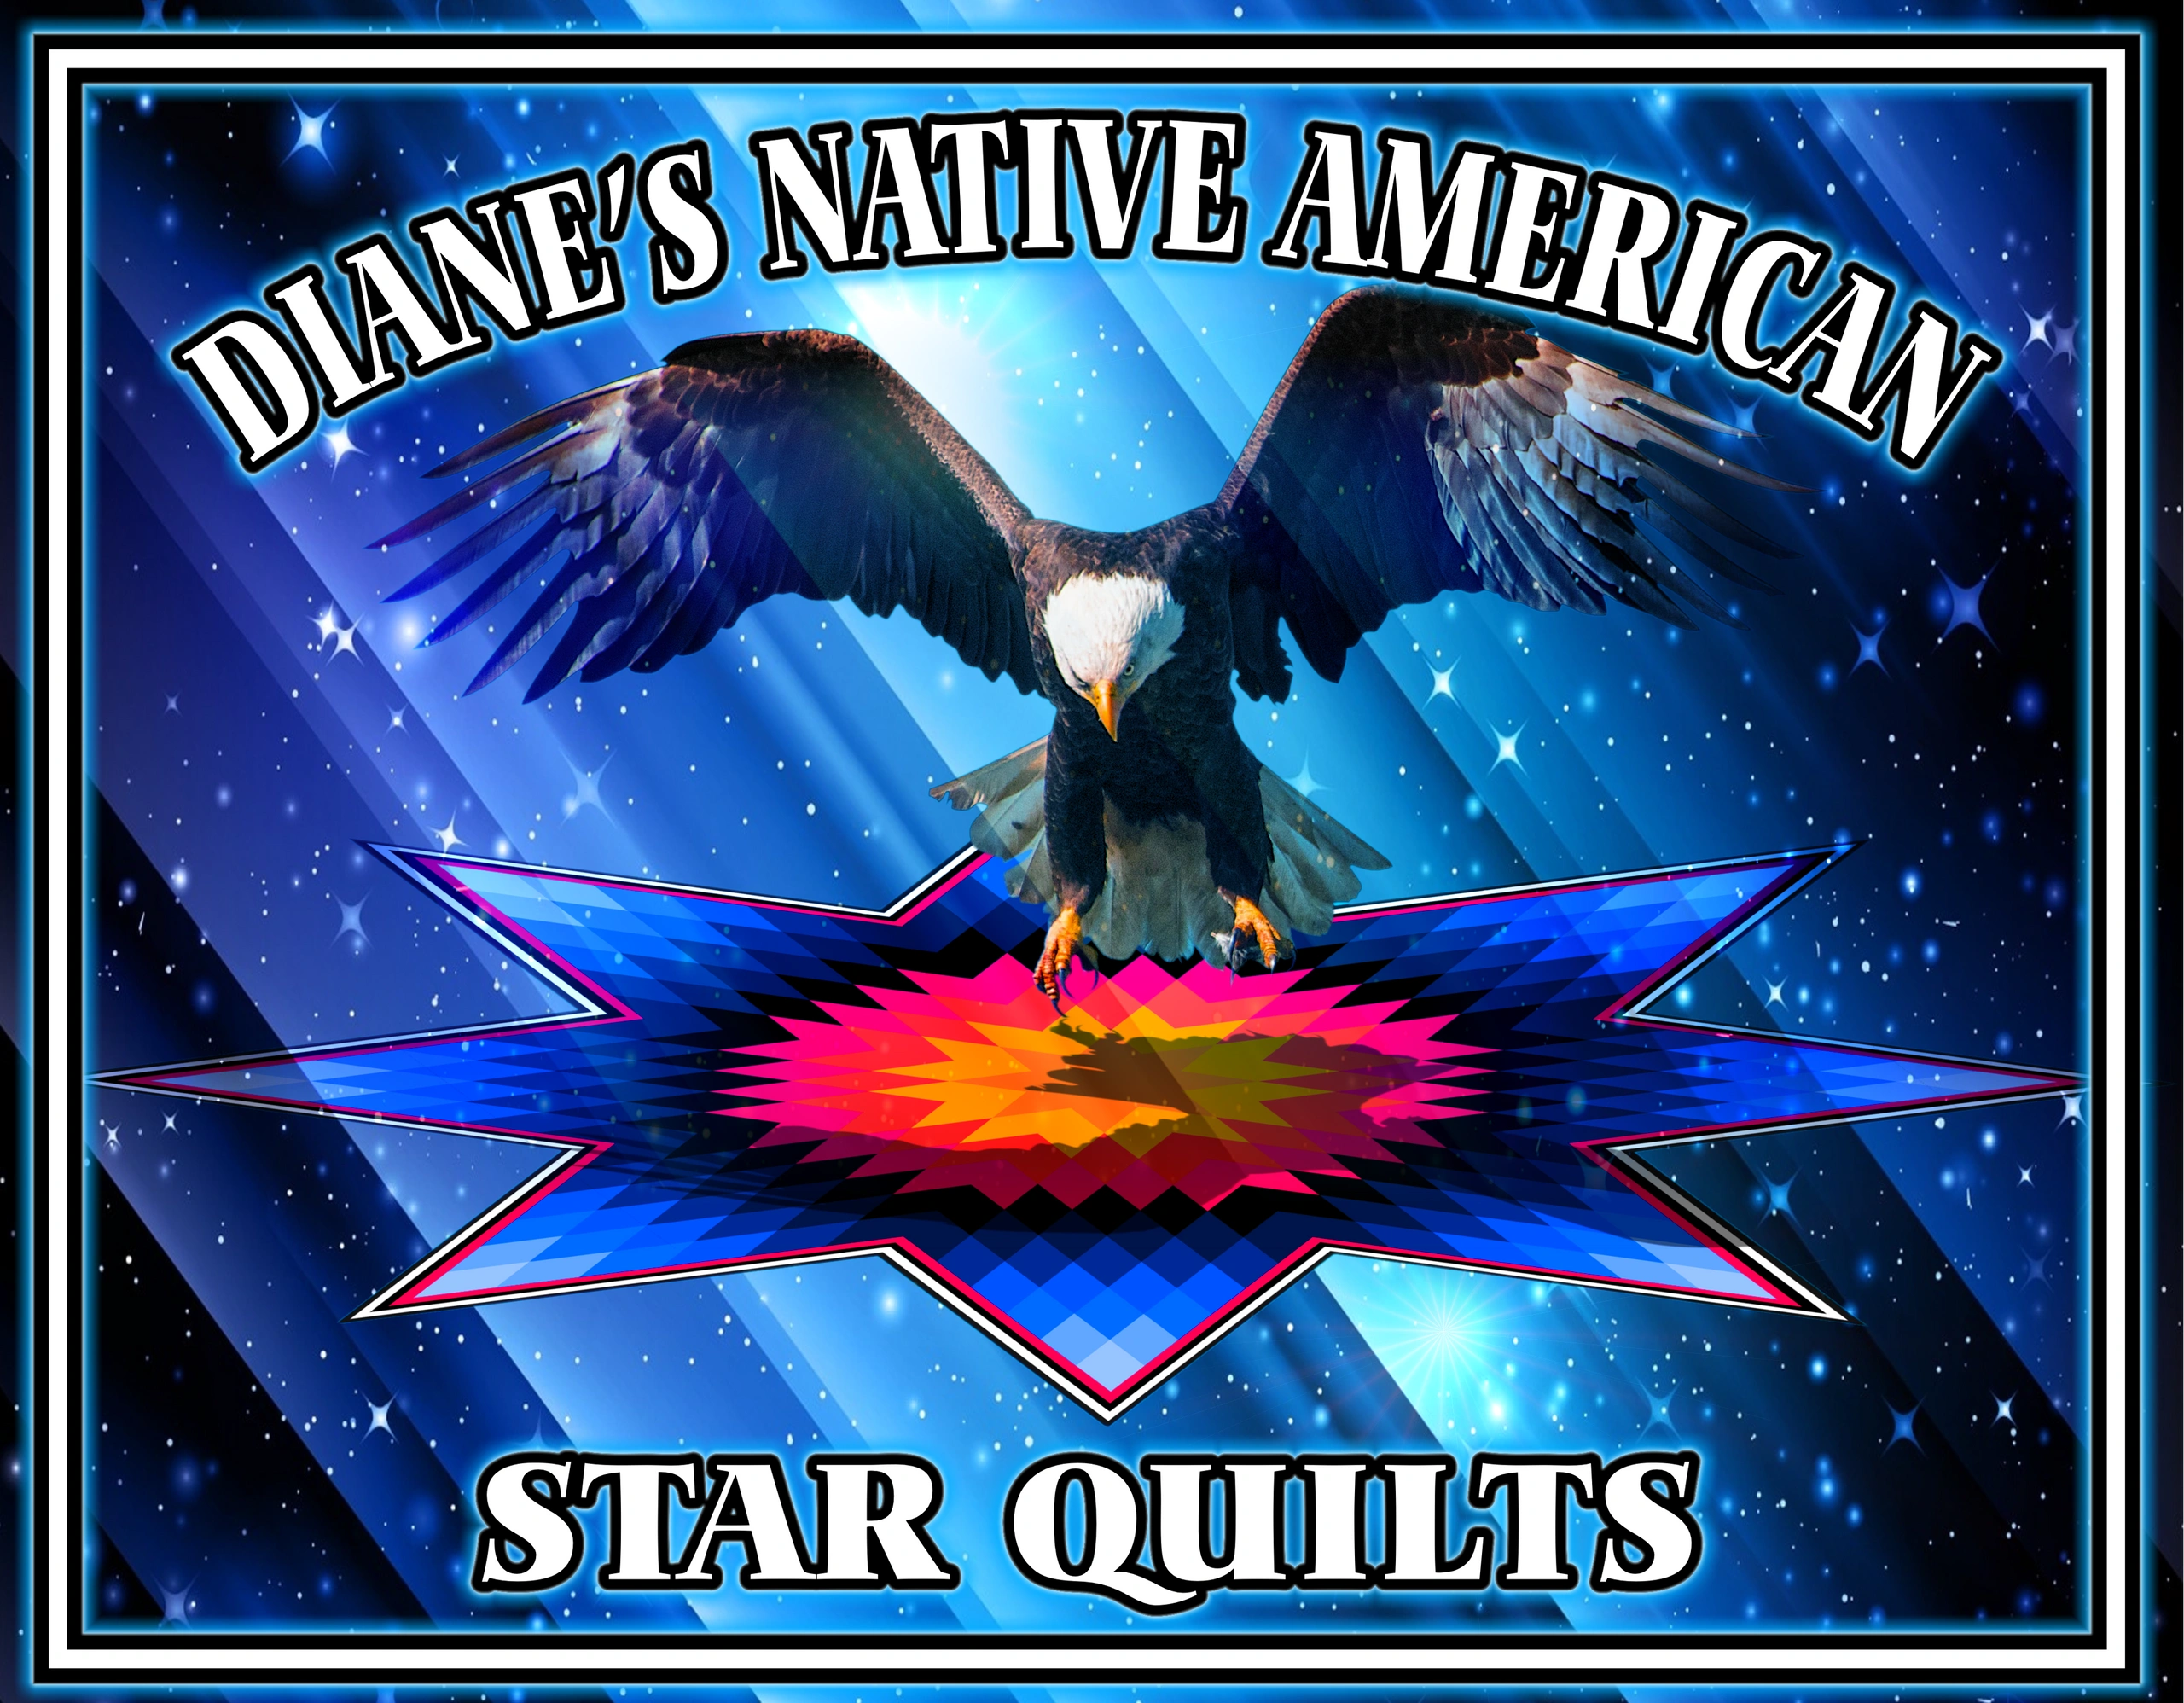 Diane's Native American Star Quilts